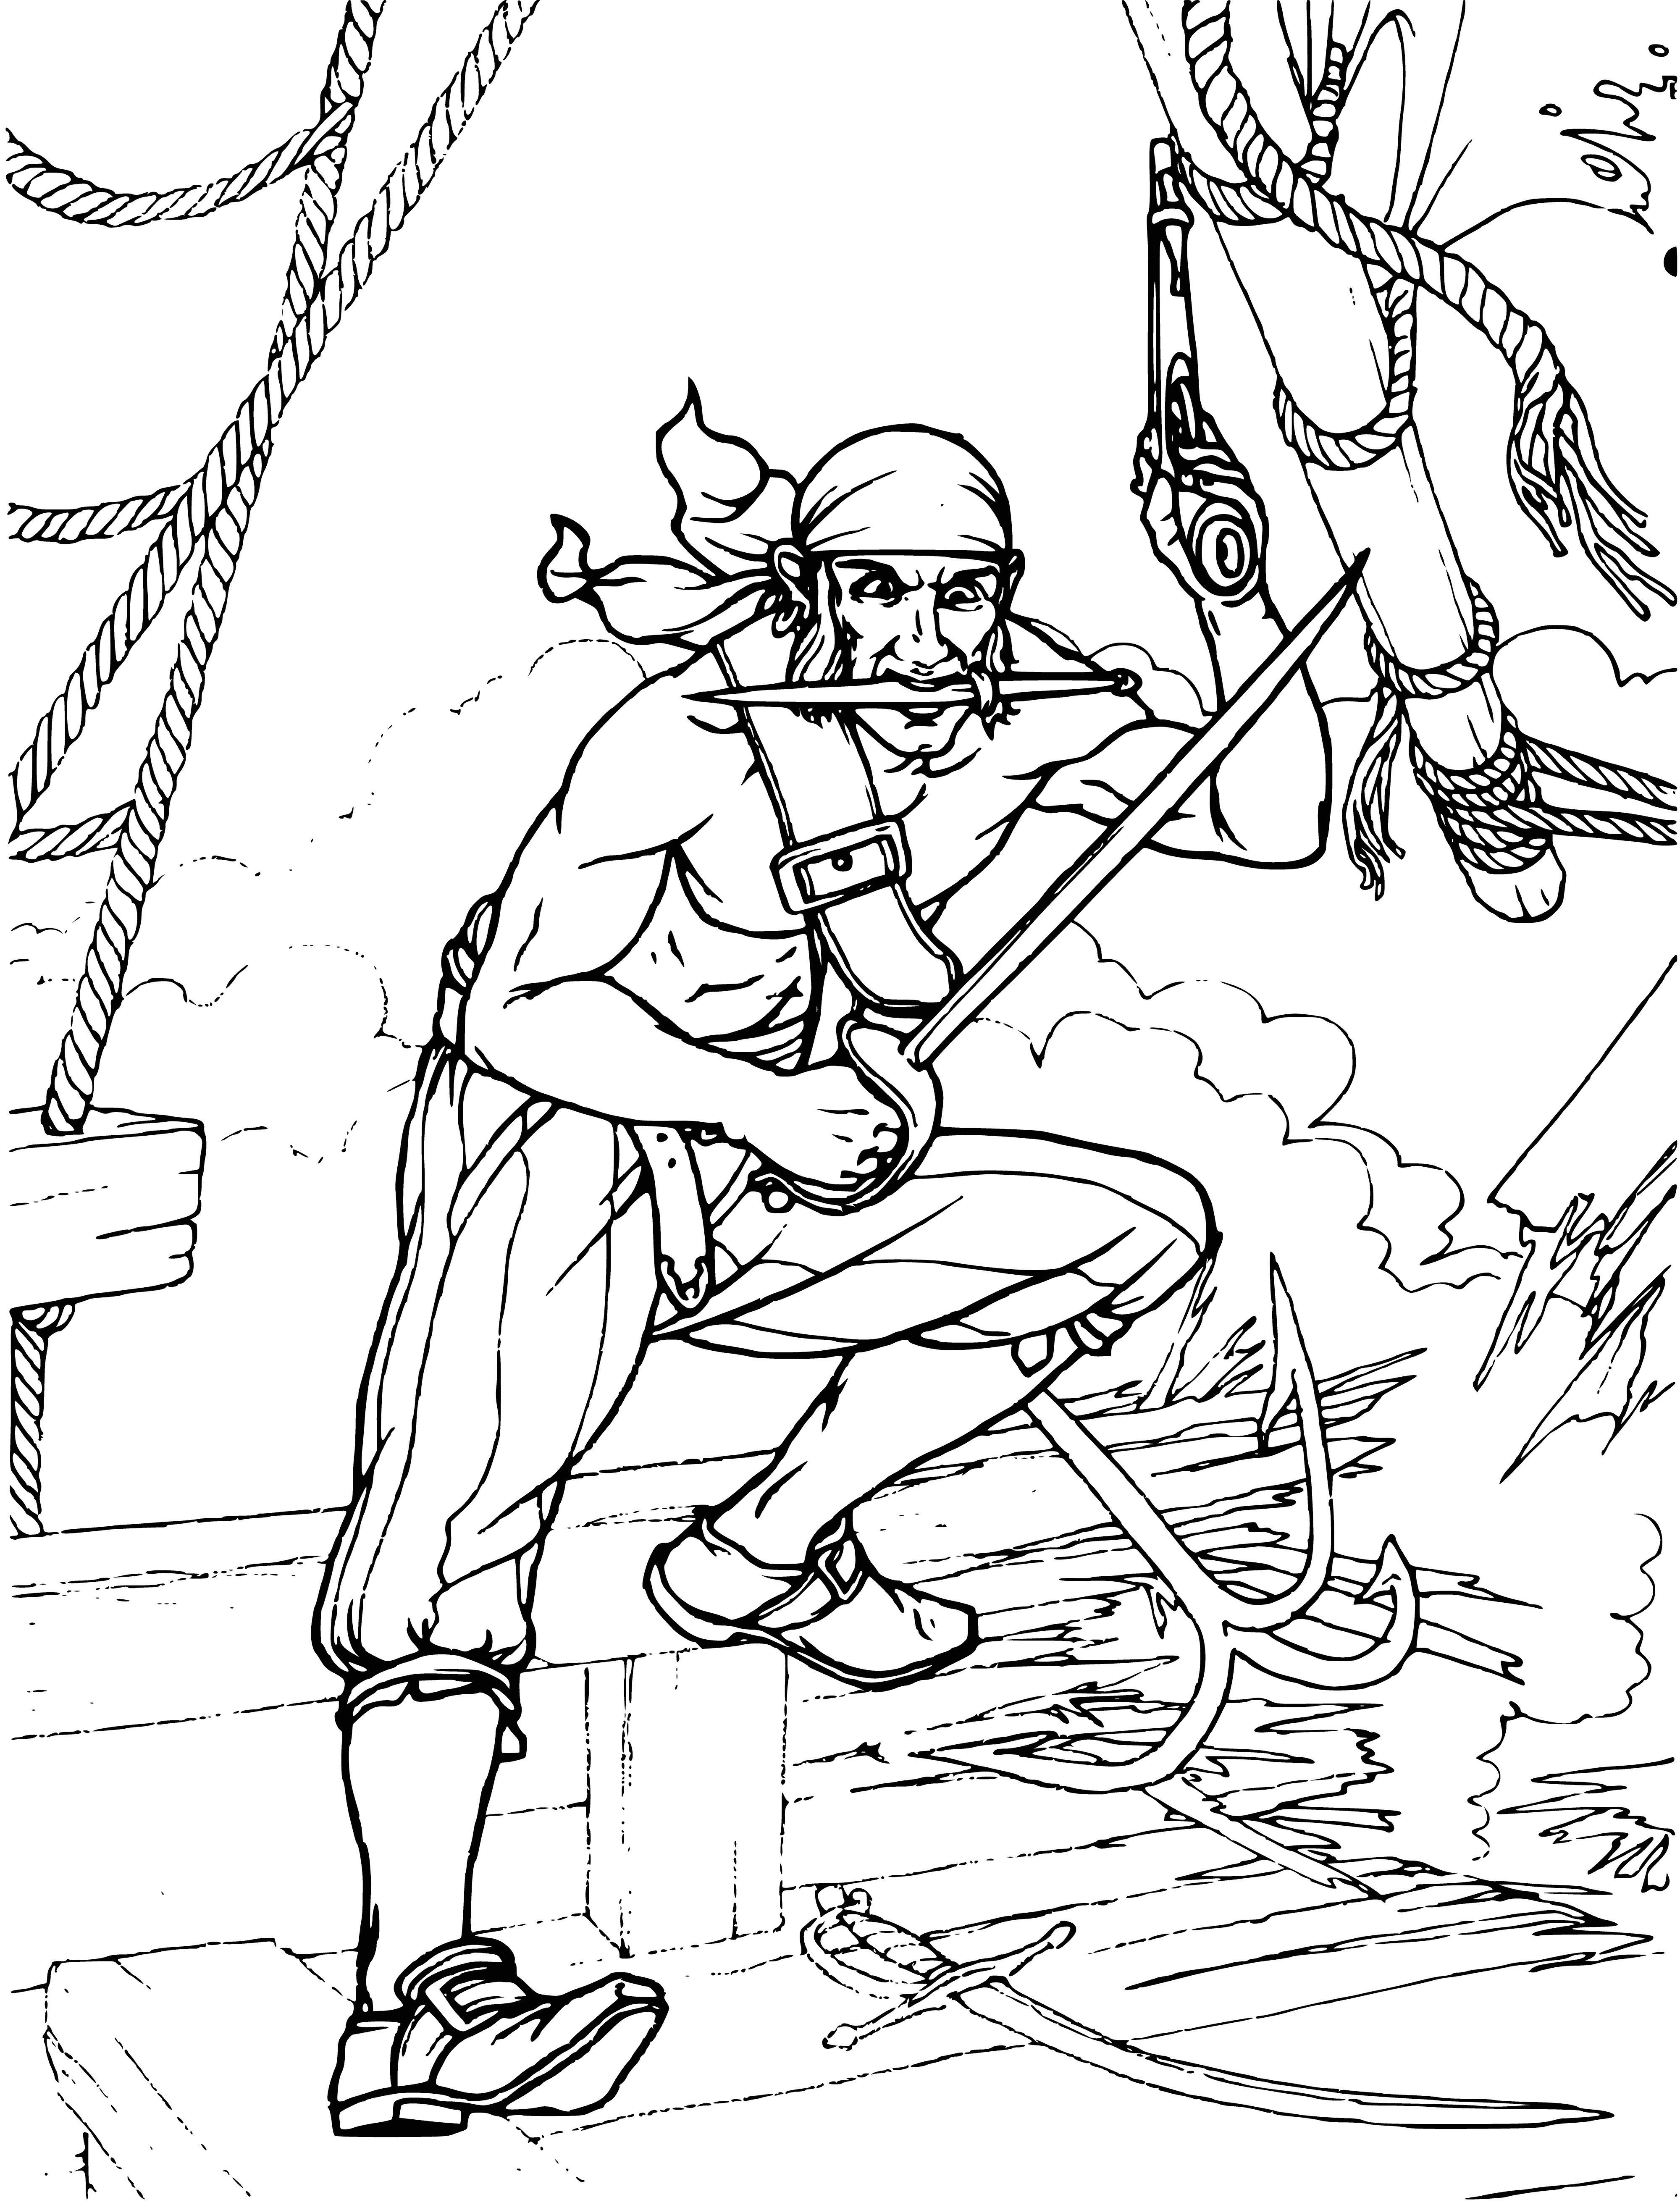 Boarding coloring page